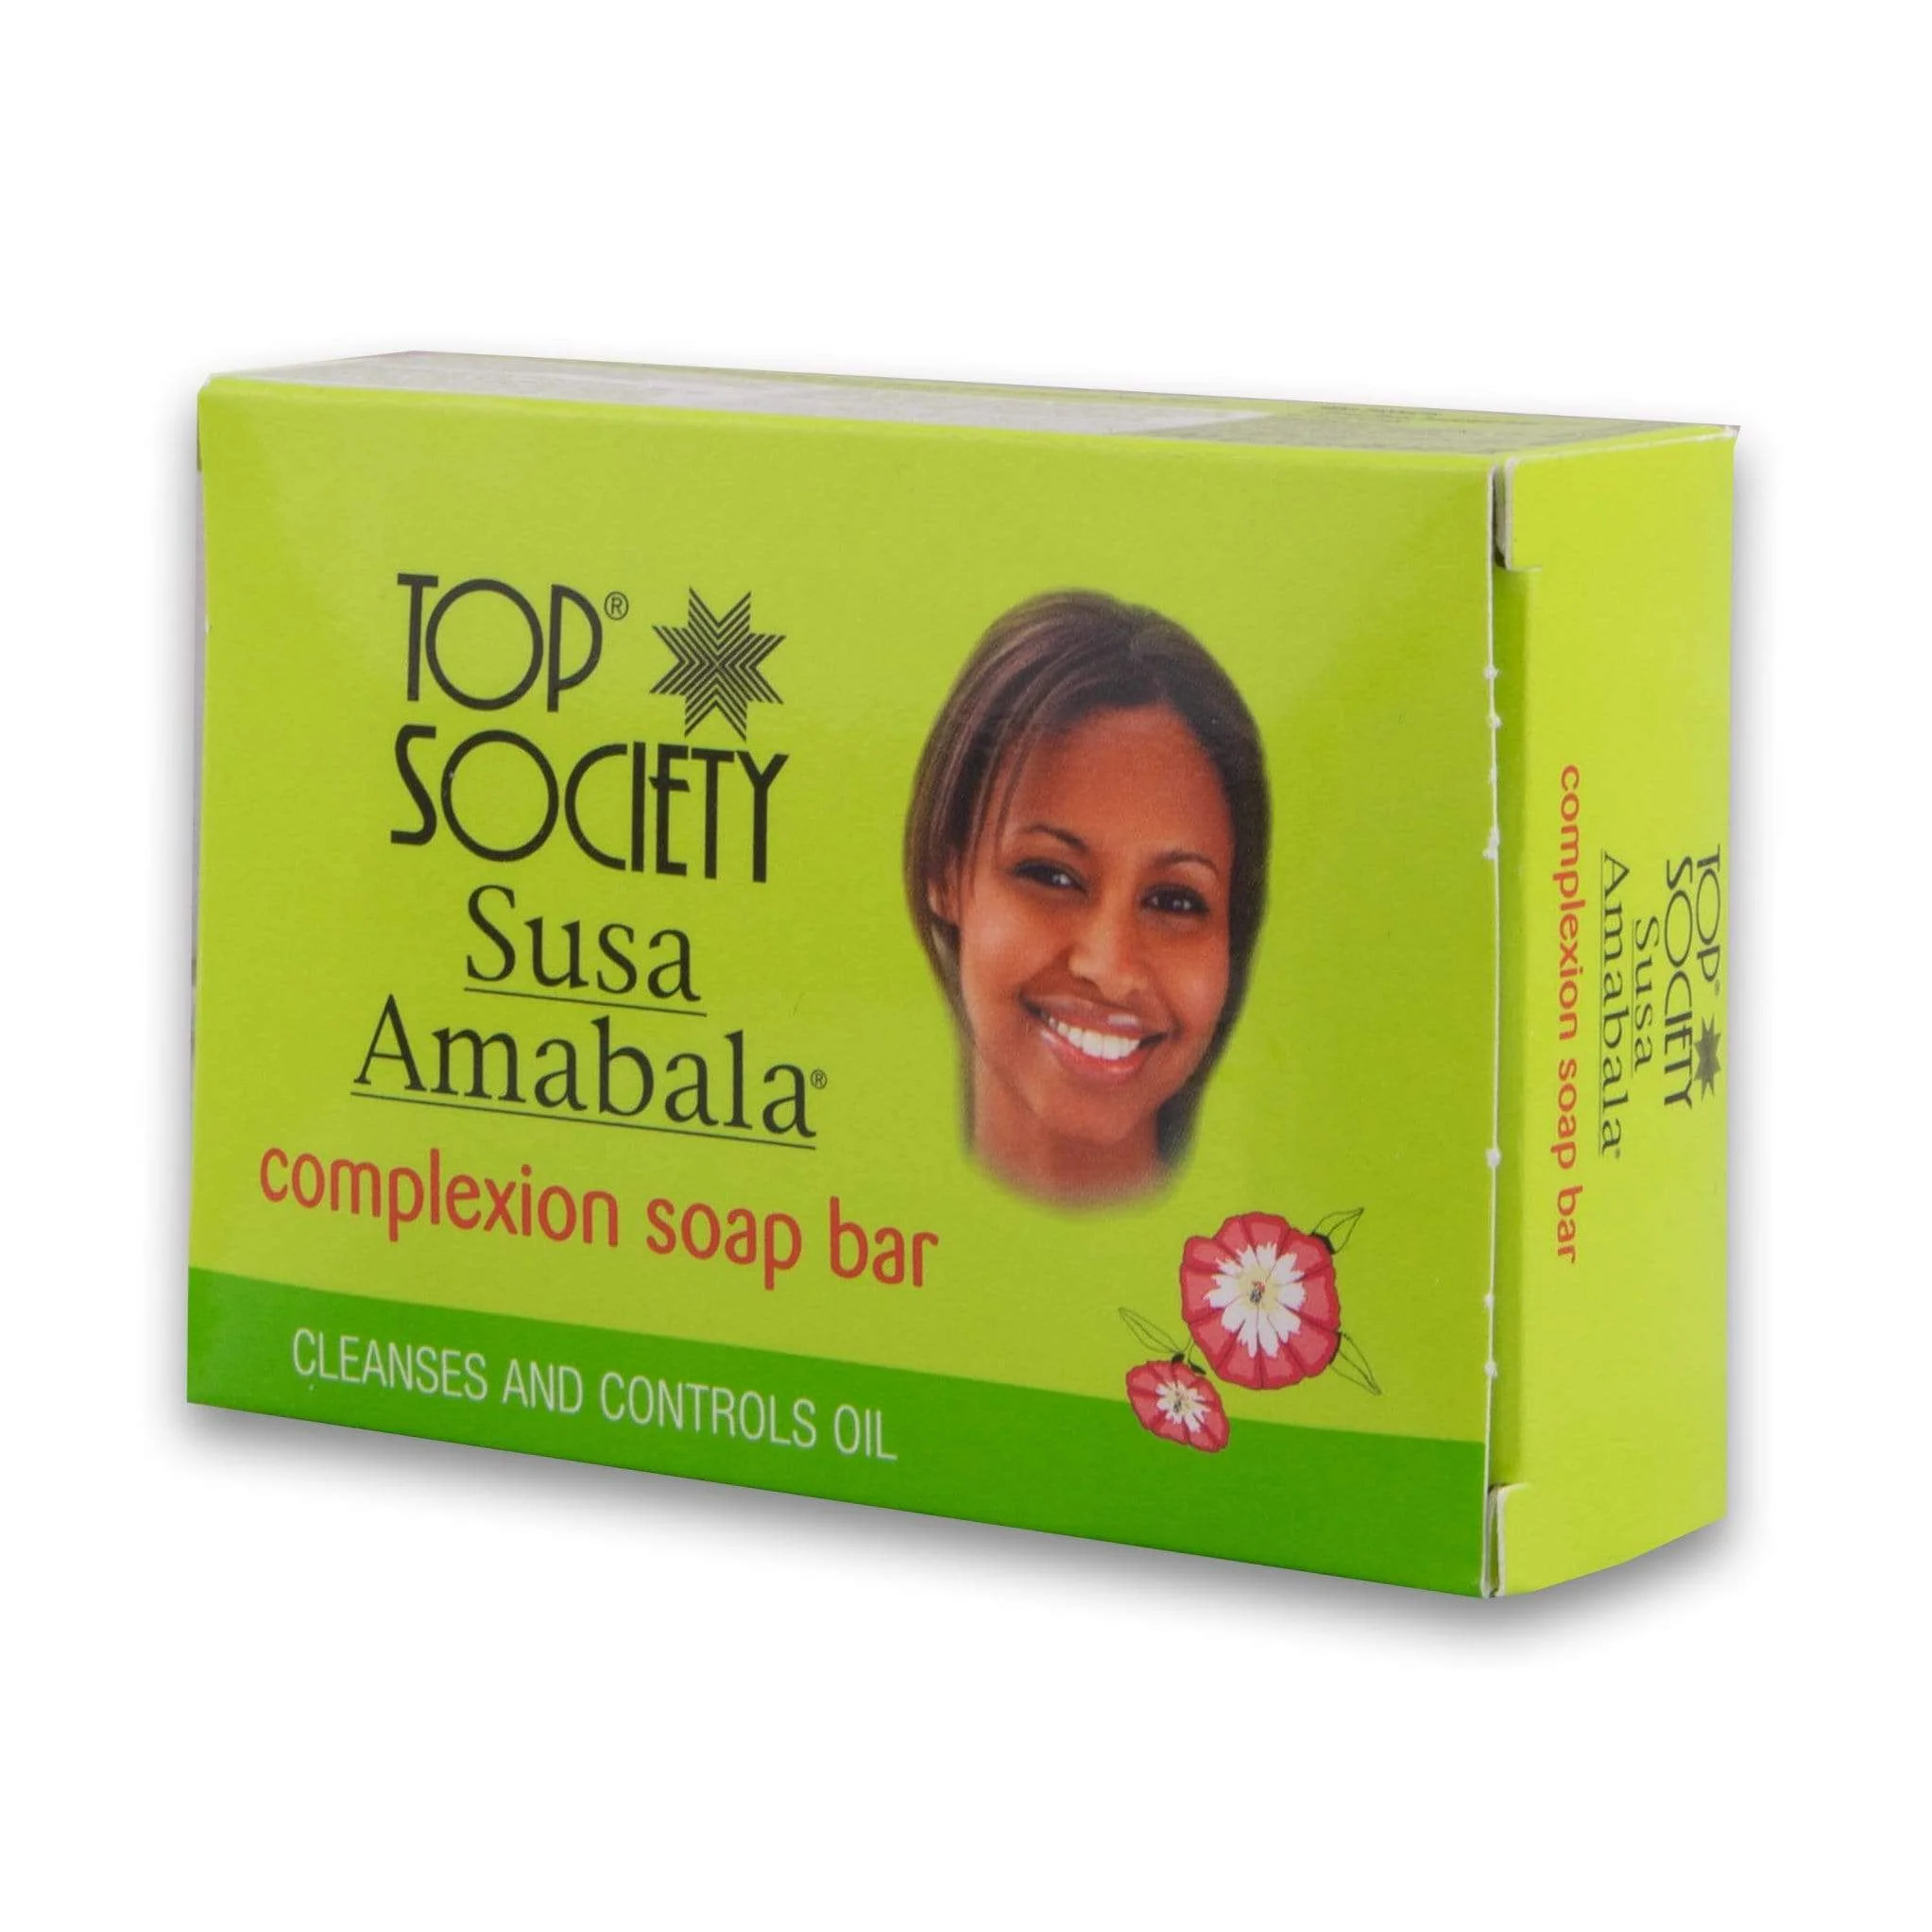 Top Society Susa Amabala Complexion Soap 100G